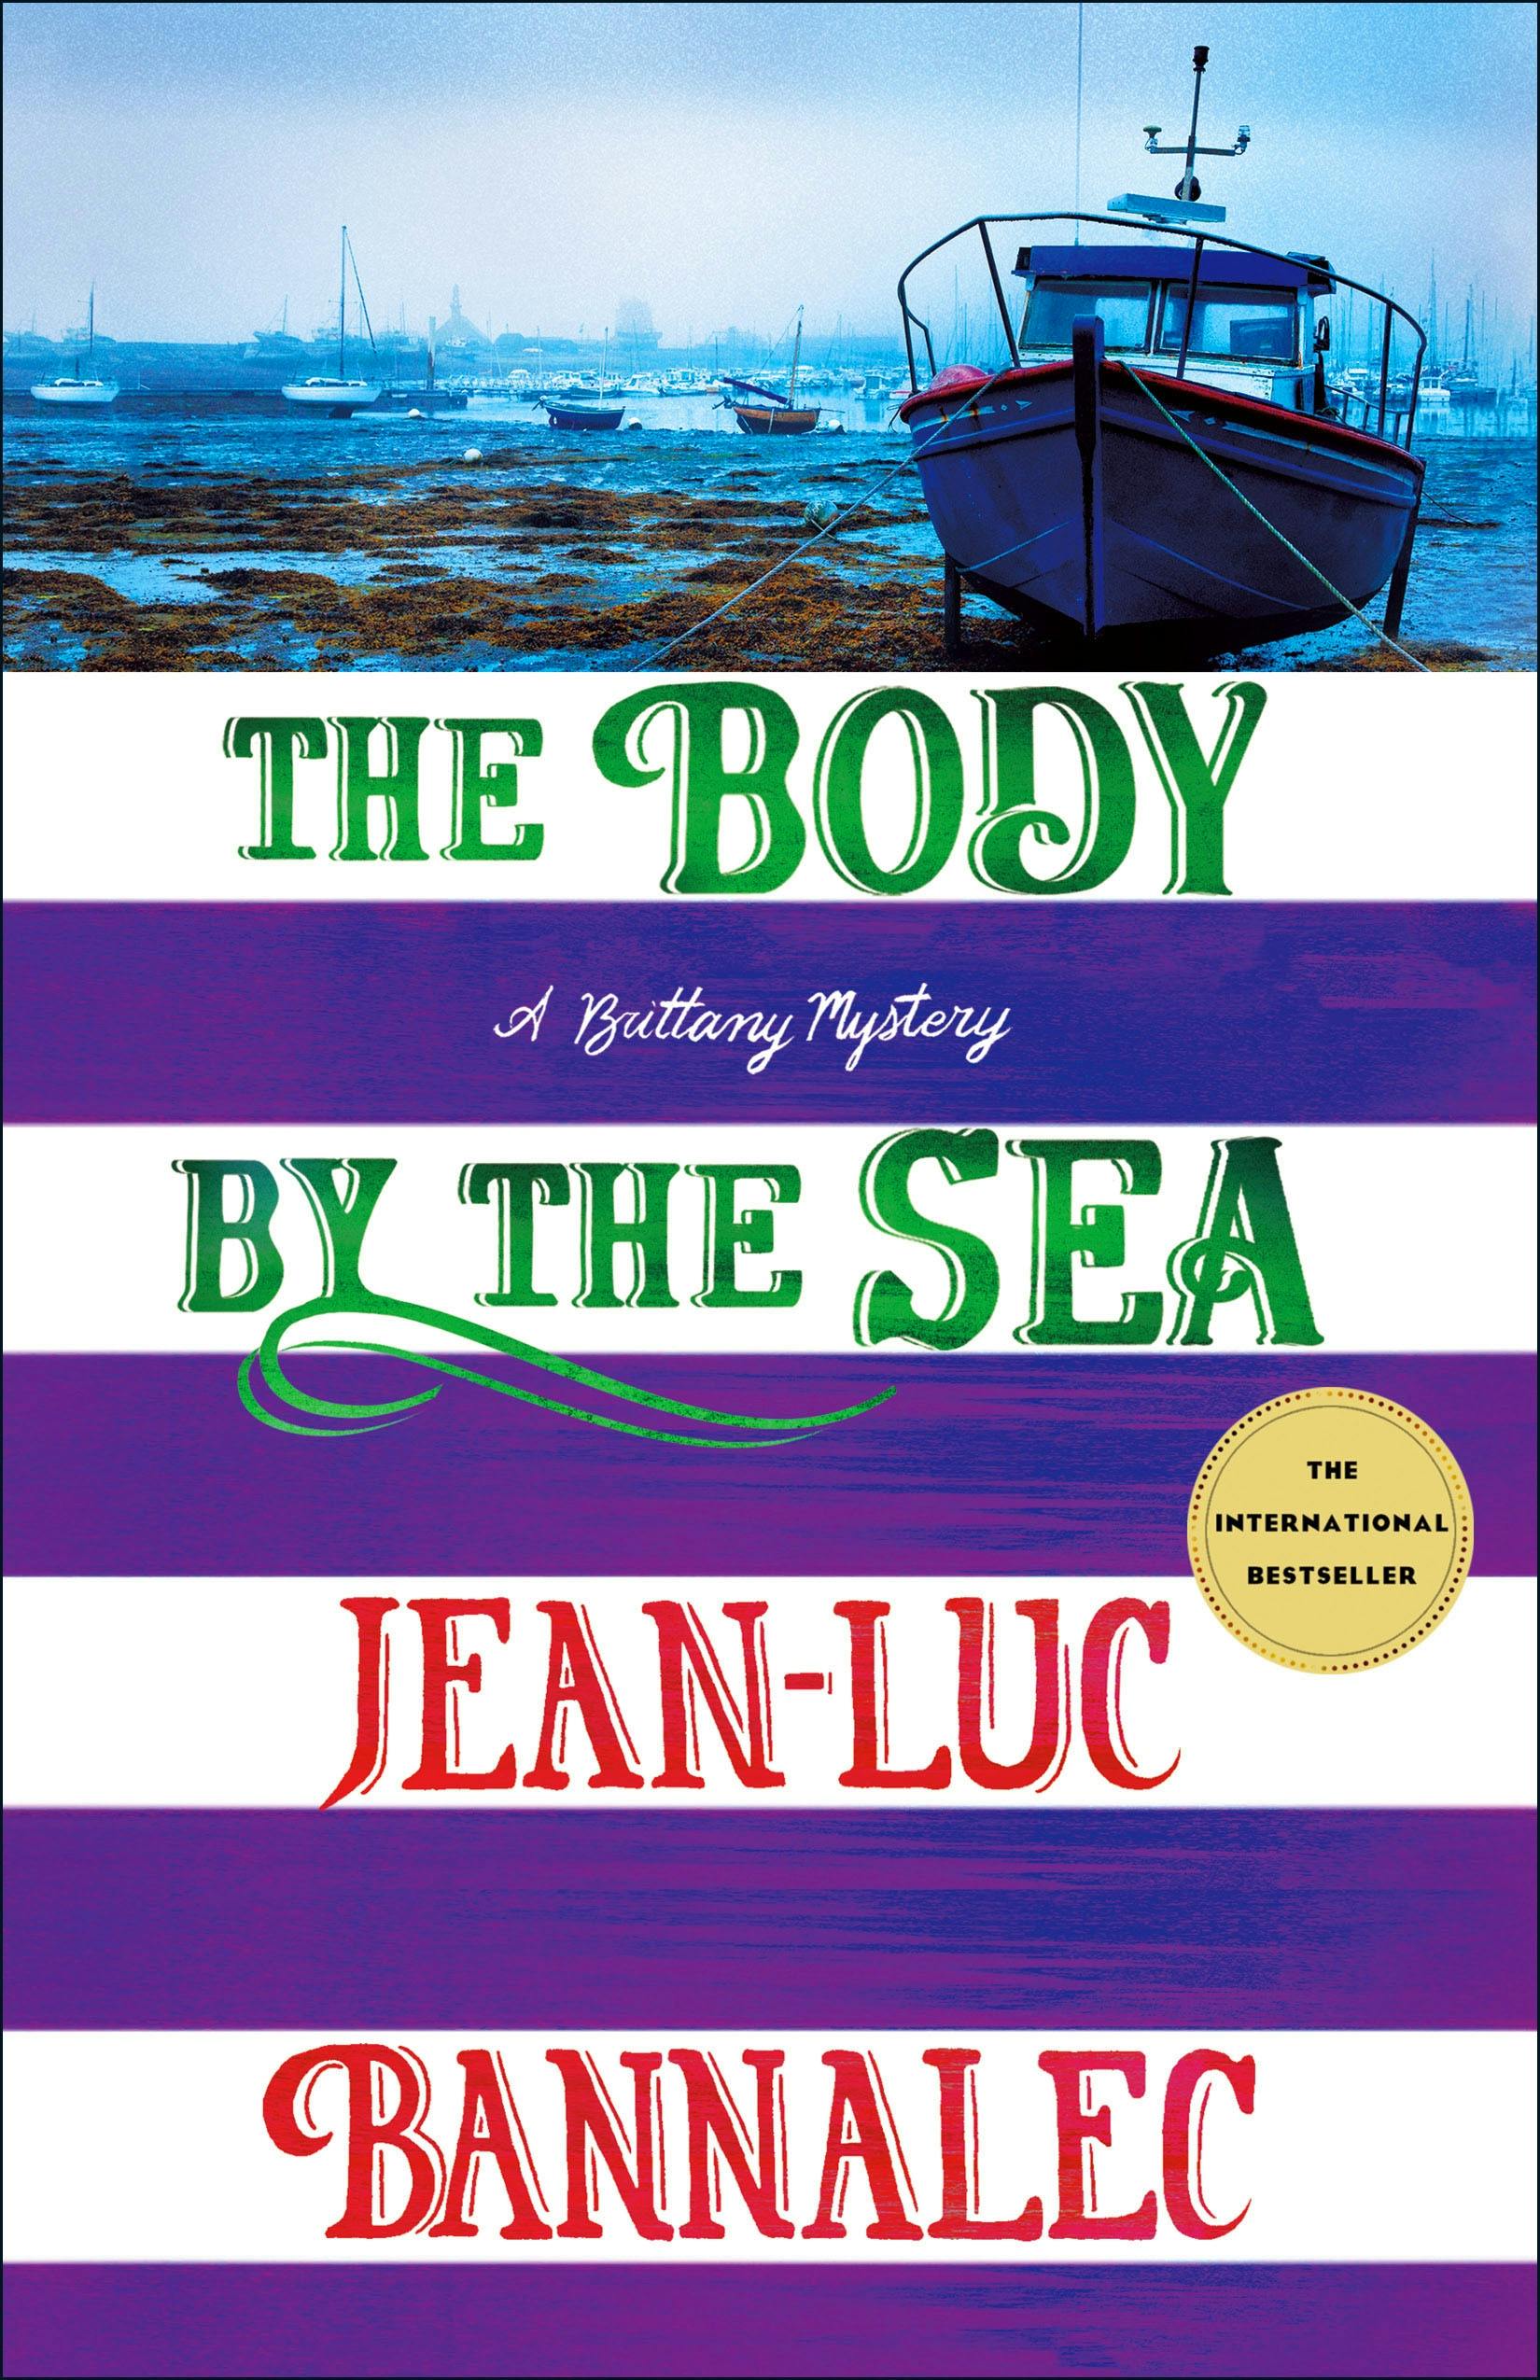 Image of The Body by the Sea